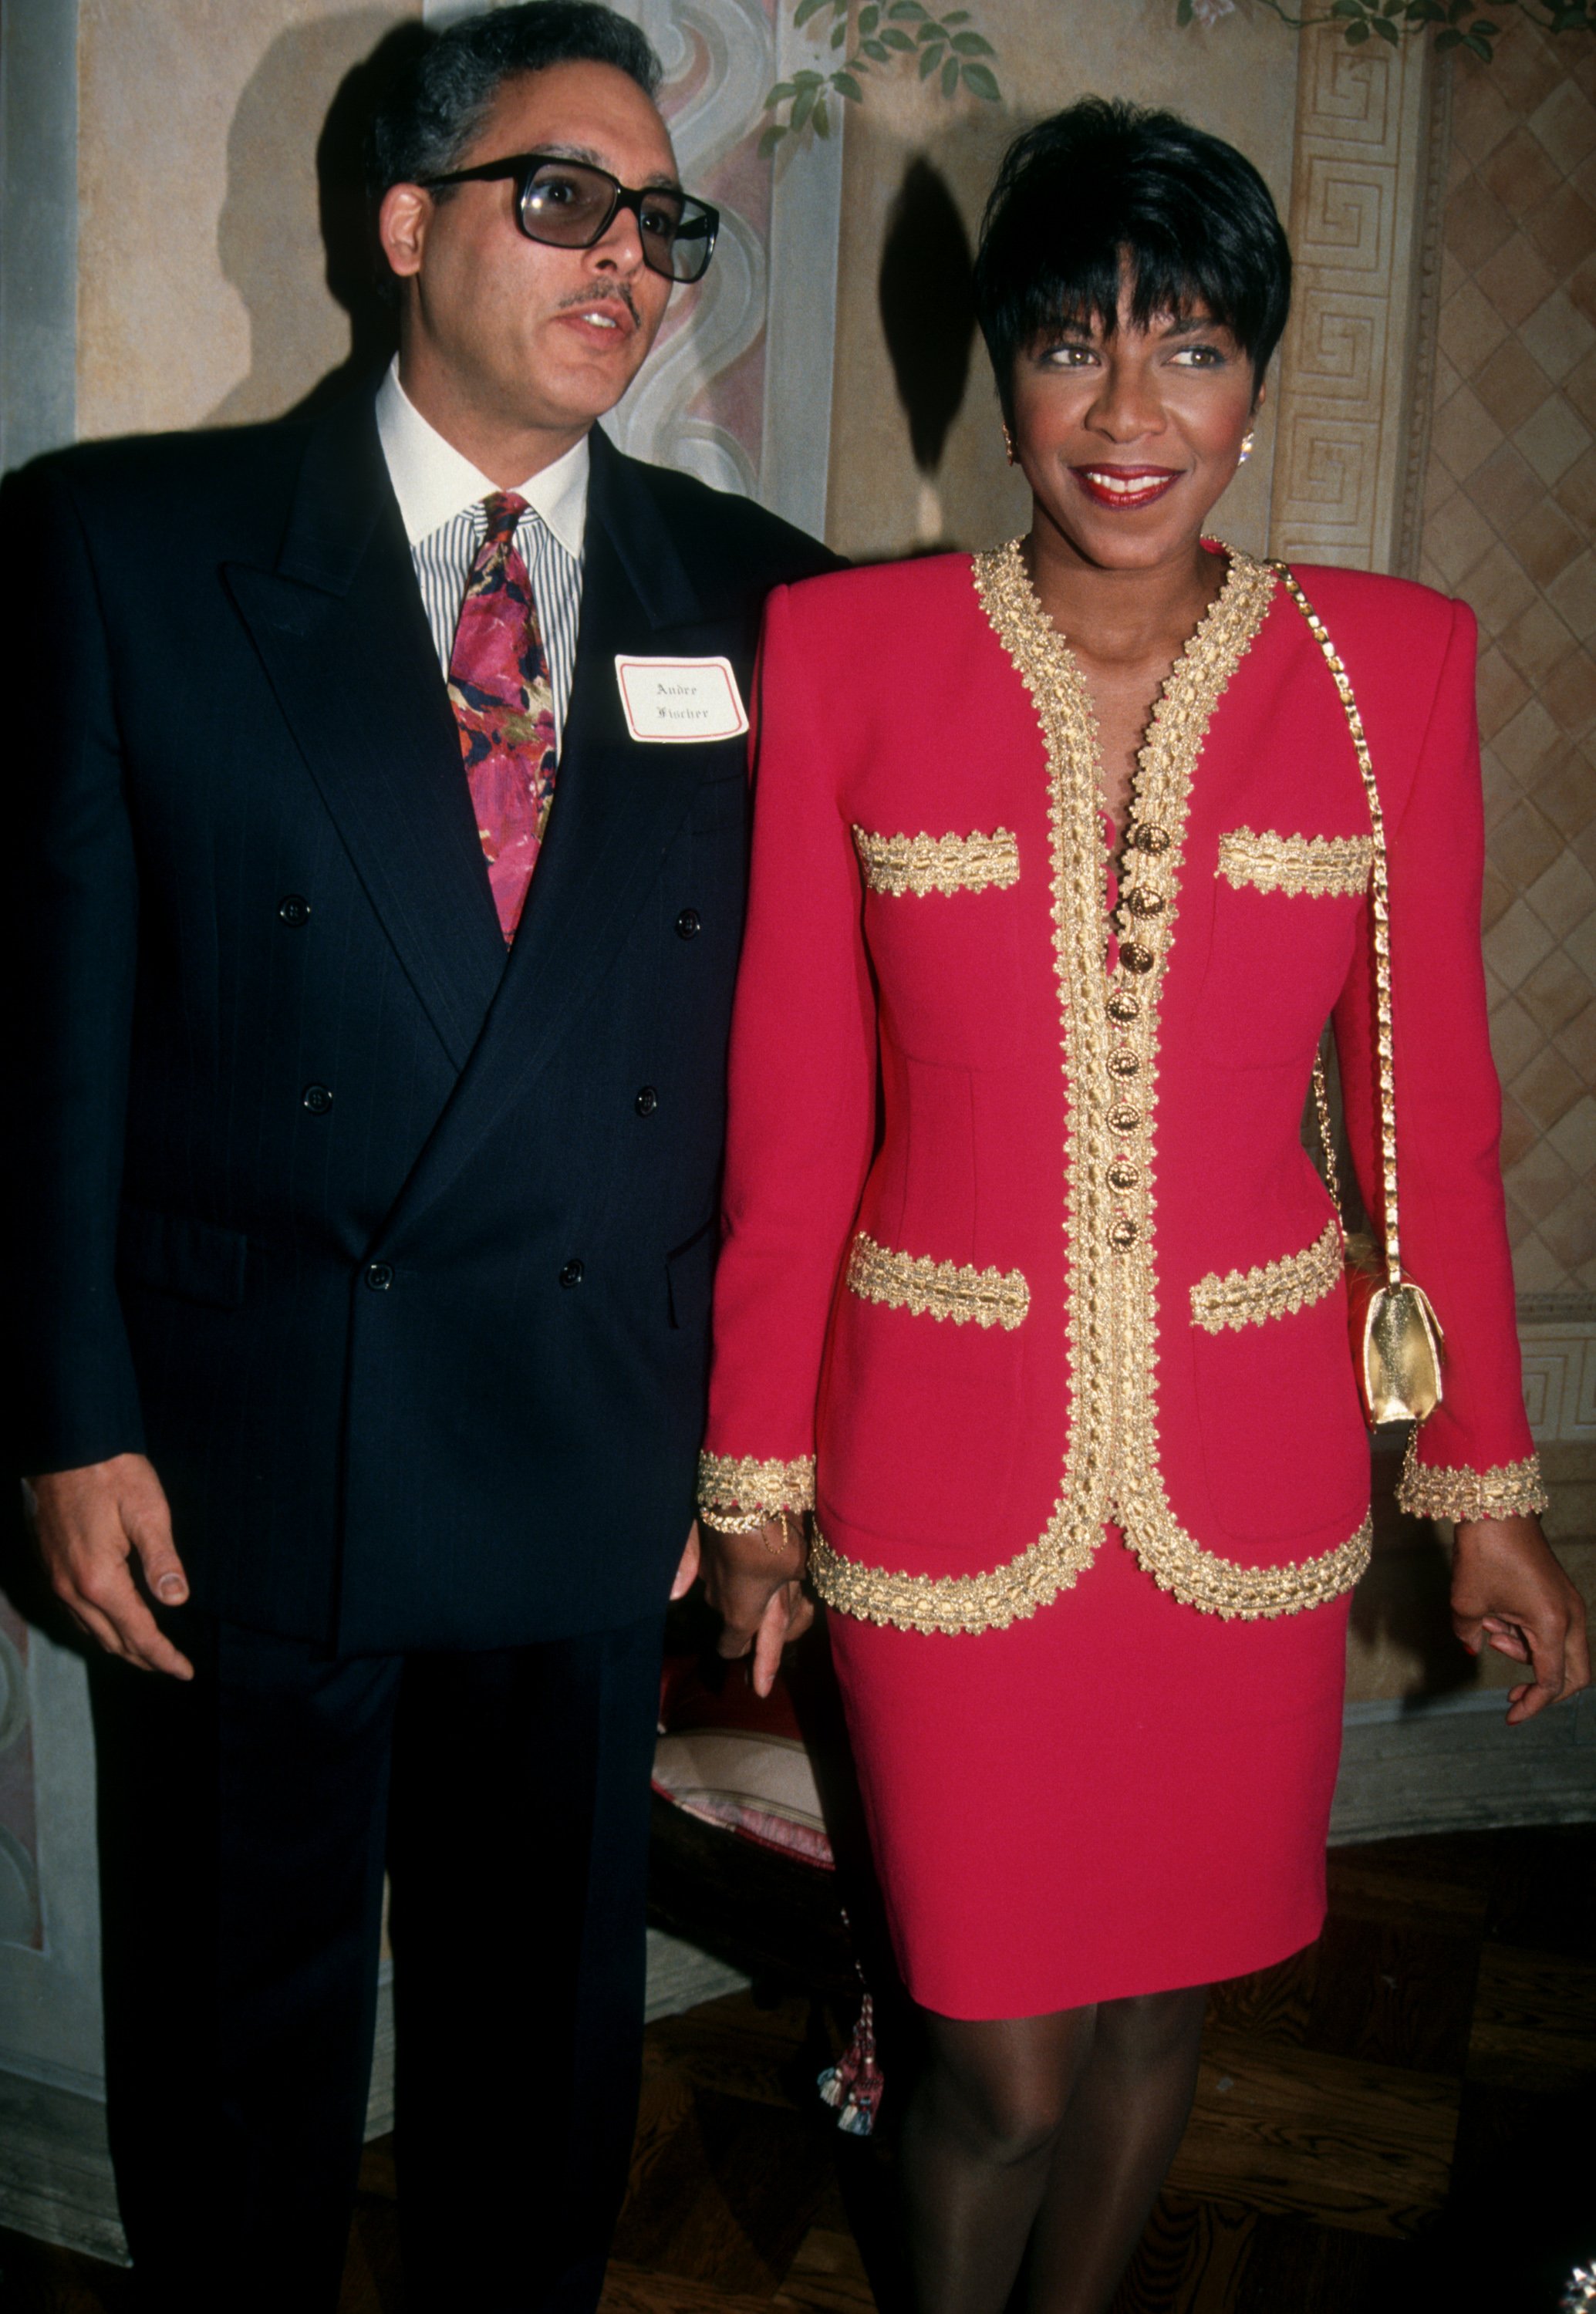 Natalie Cole and husband Andre Fischer attending "Casey Kasem's Christmas Party" on December 21, 1991 at Casey Kasem's Home in Bel Air, California | Source: Getty Images